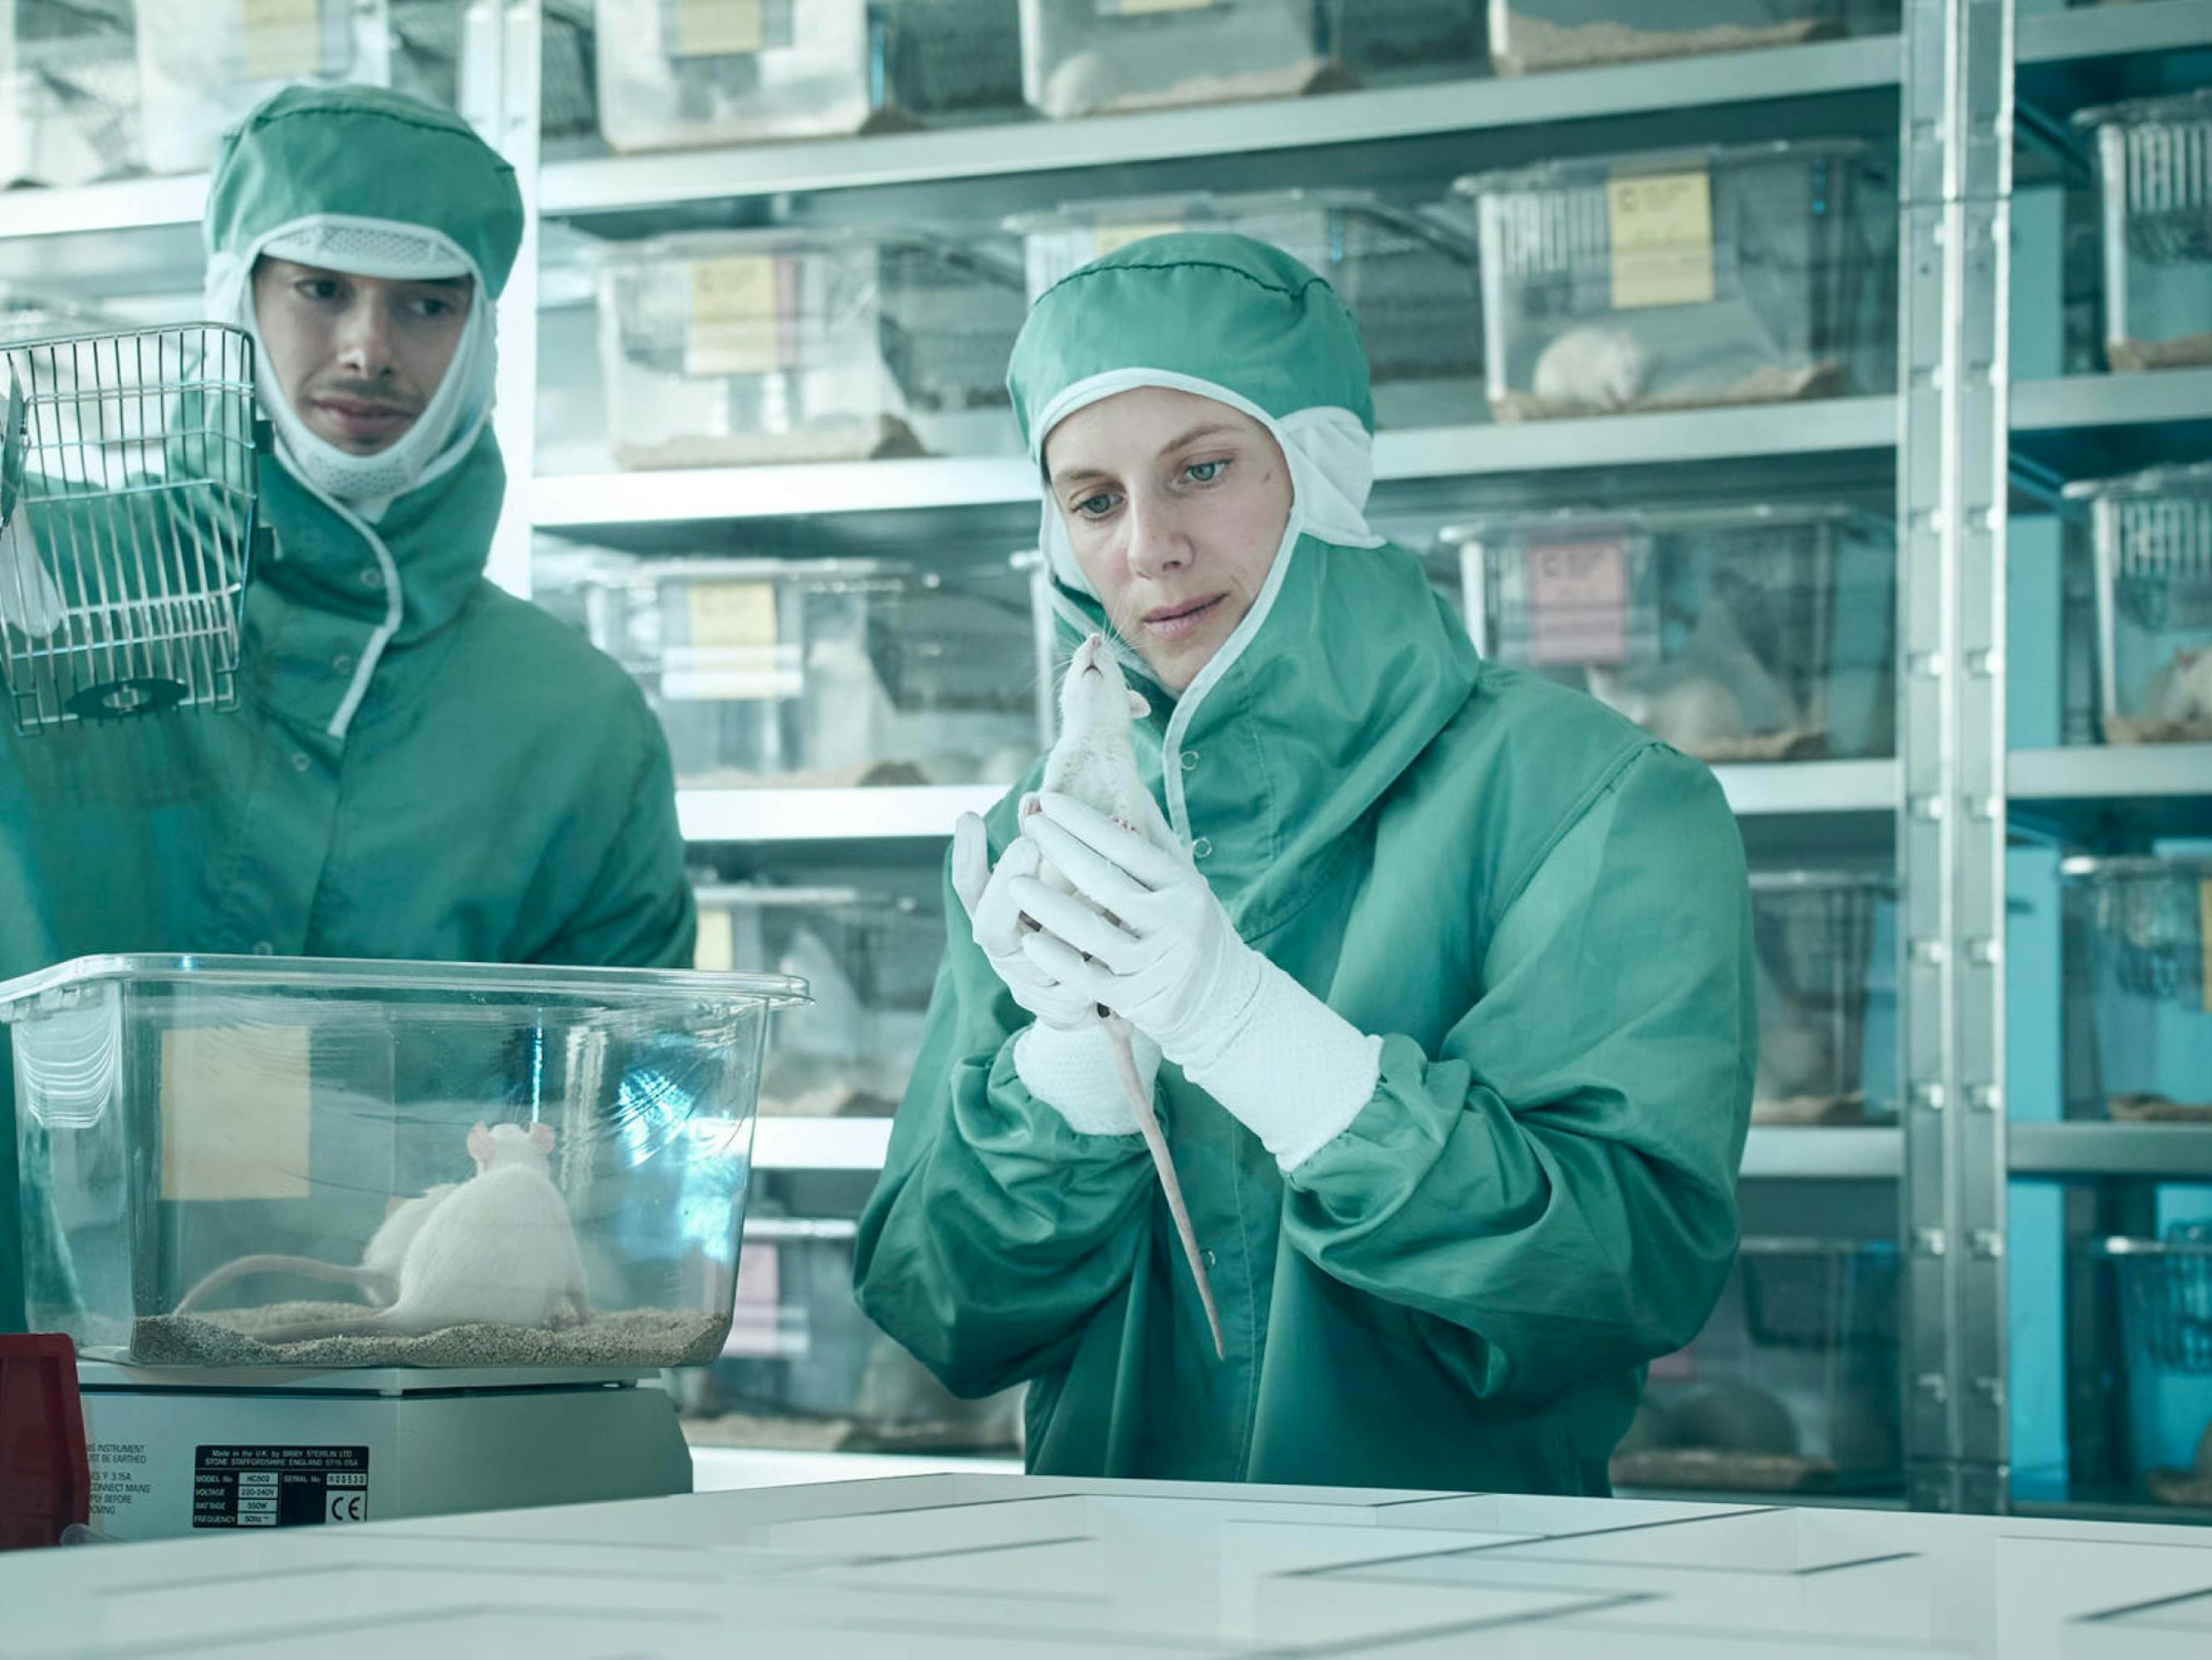 In what appears to be a flashback based on the lighting, Laurent and a man stand in a lab, dressed head to toe in green medical garb. She holds a white mouse in her hand, and to her right and behind her are many other white mice in clear boxes.